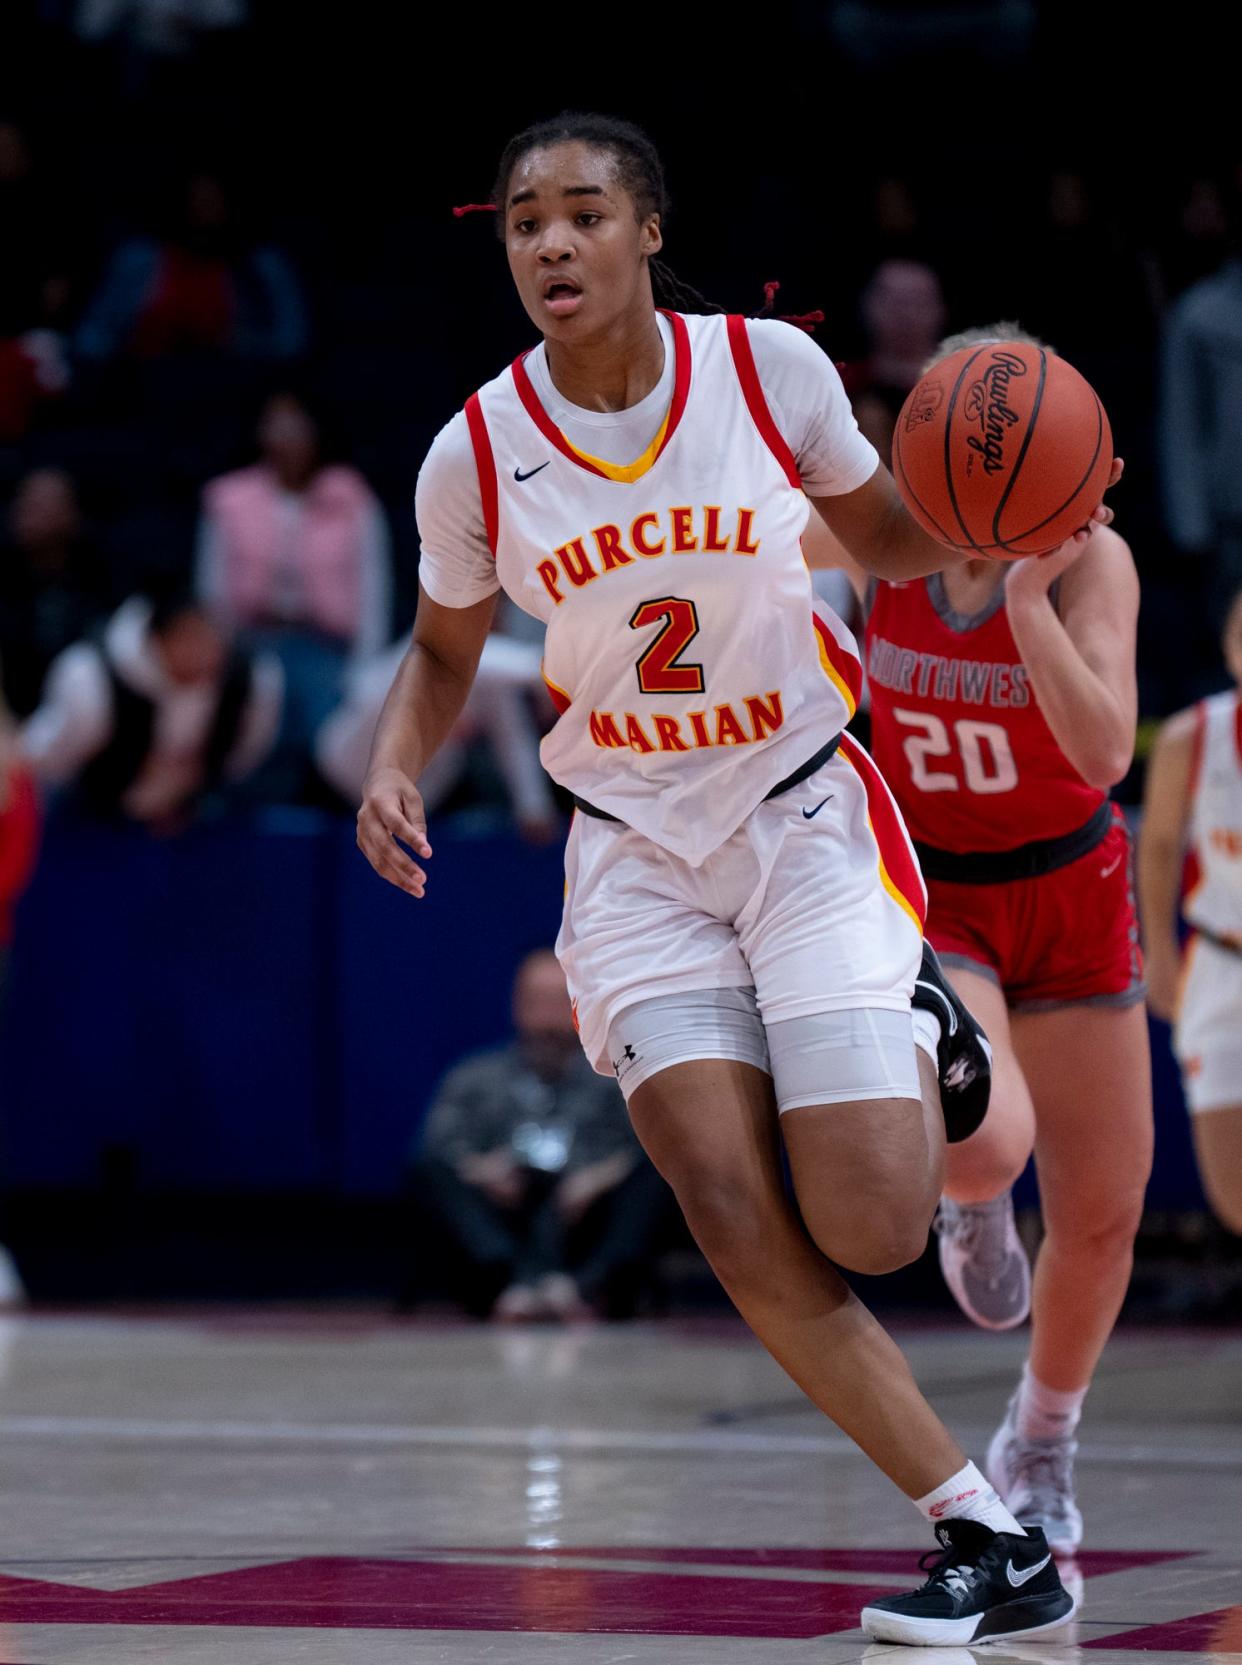 Purcell Marian junior Dee Alexander (2) will lead the Cavaliers into a clash at Cooper on Dec. 12.